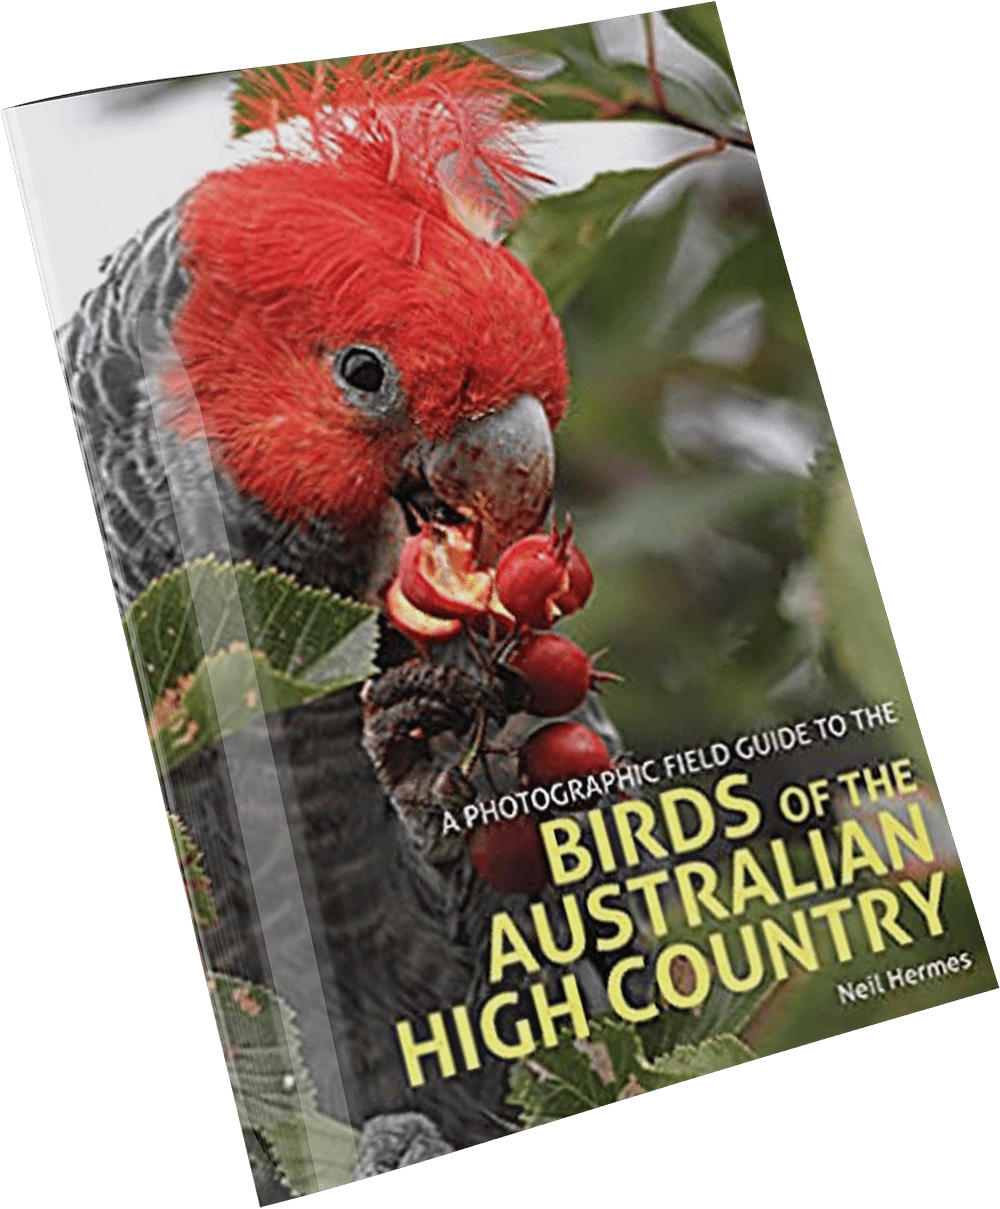 Neil Hermes Book: A Photographic Field Guide to The Birds of the Australian High Country